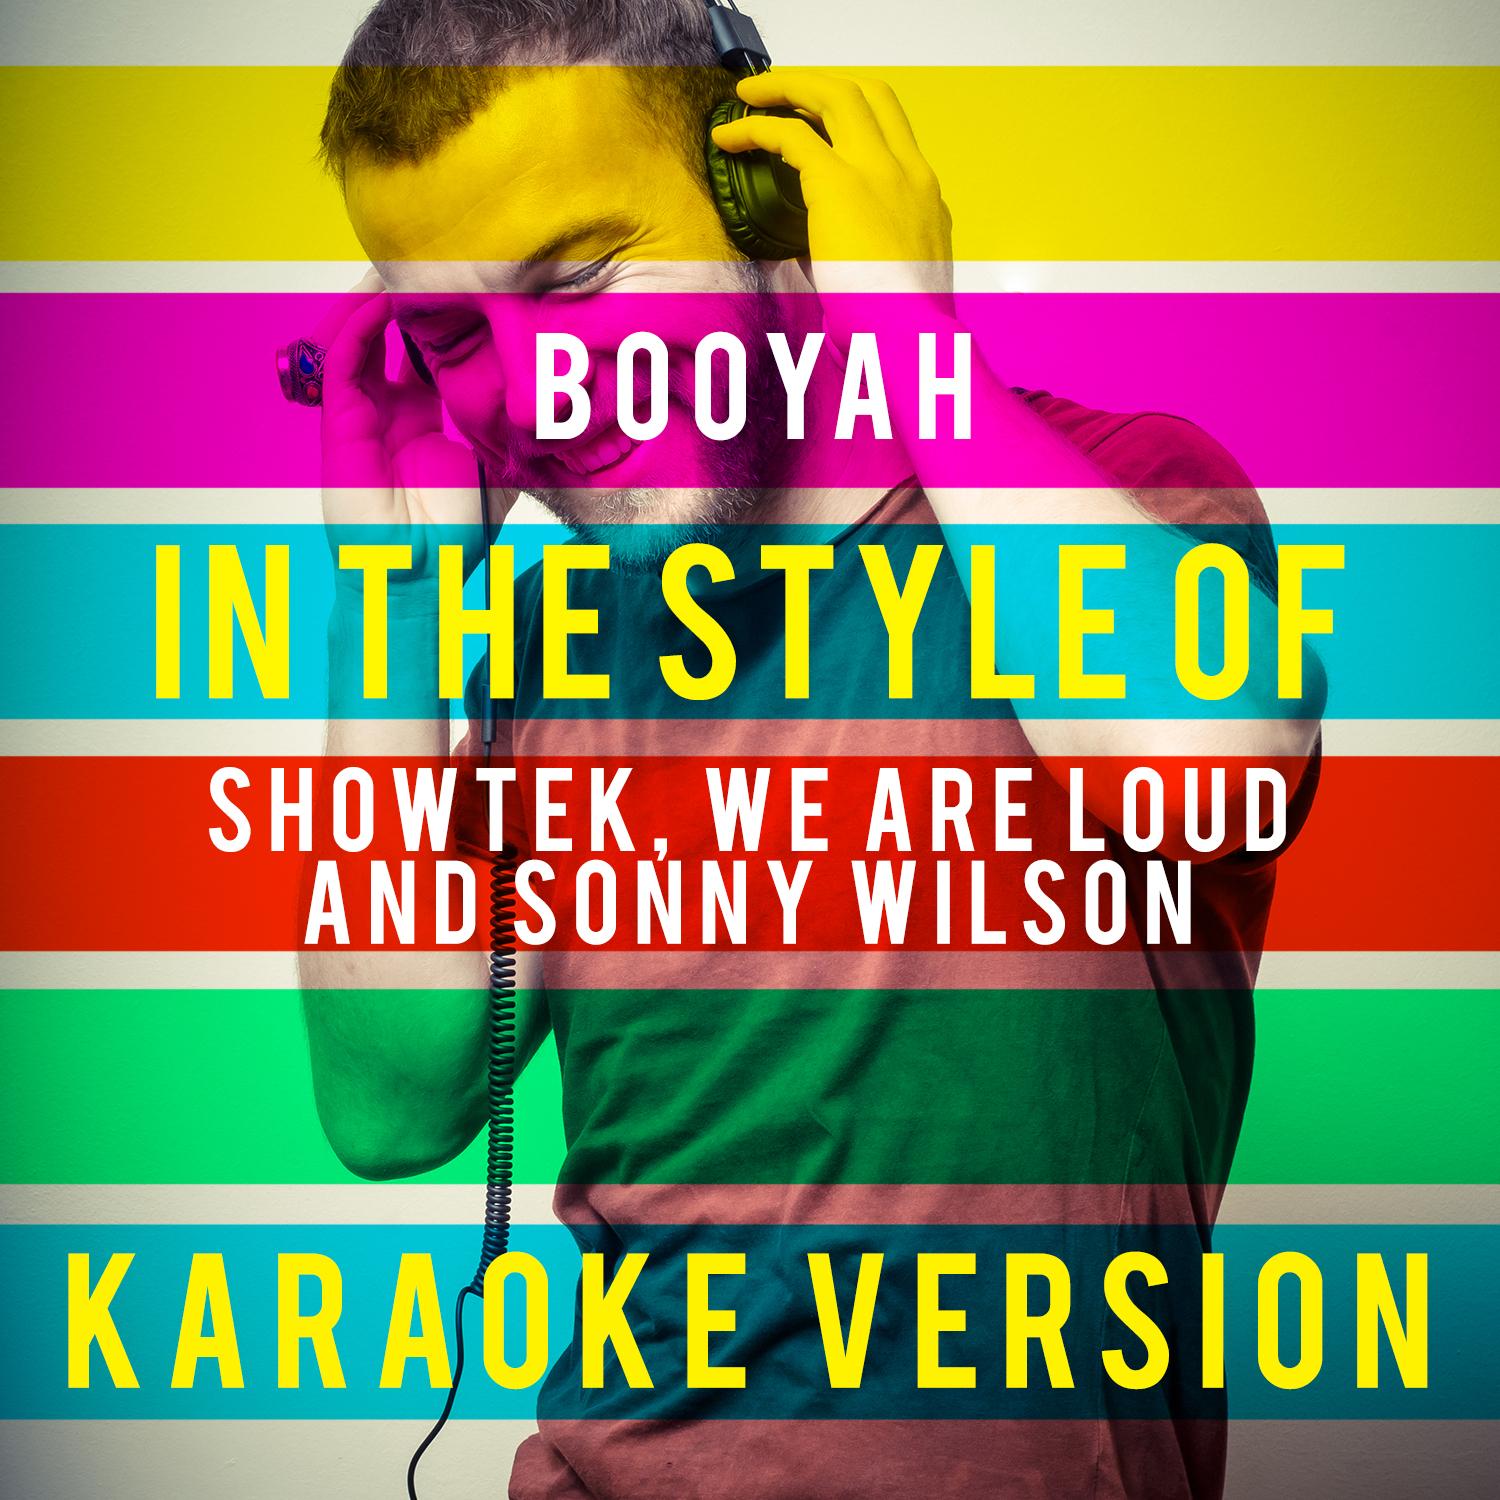 Booyah (In the Style of Showtek, We Are Loud and Sonny Wilson) [Karaoke Version] - Single